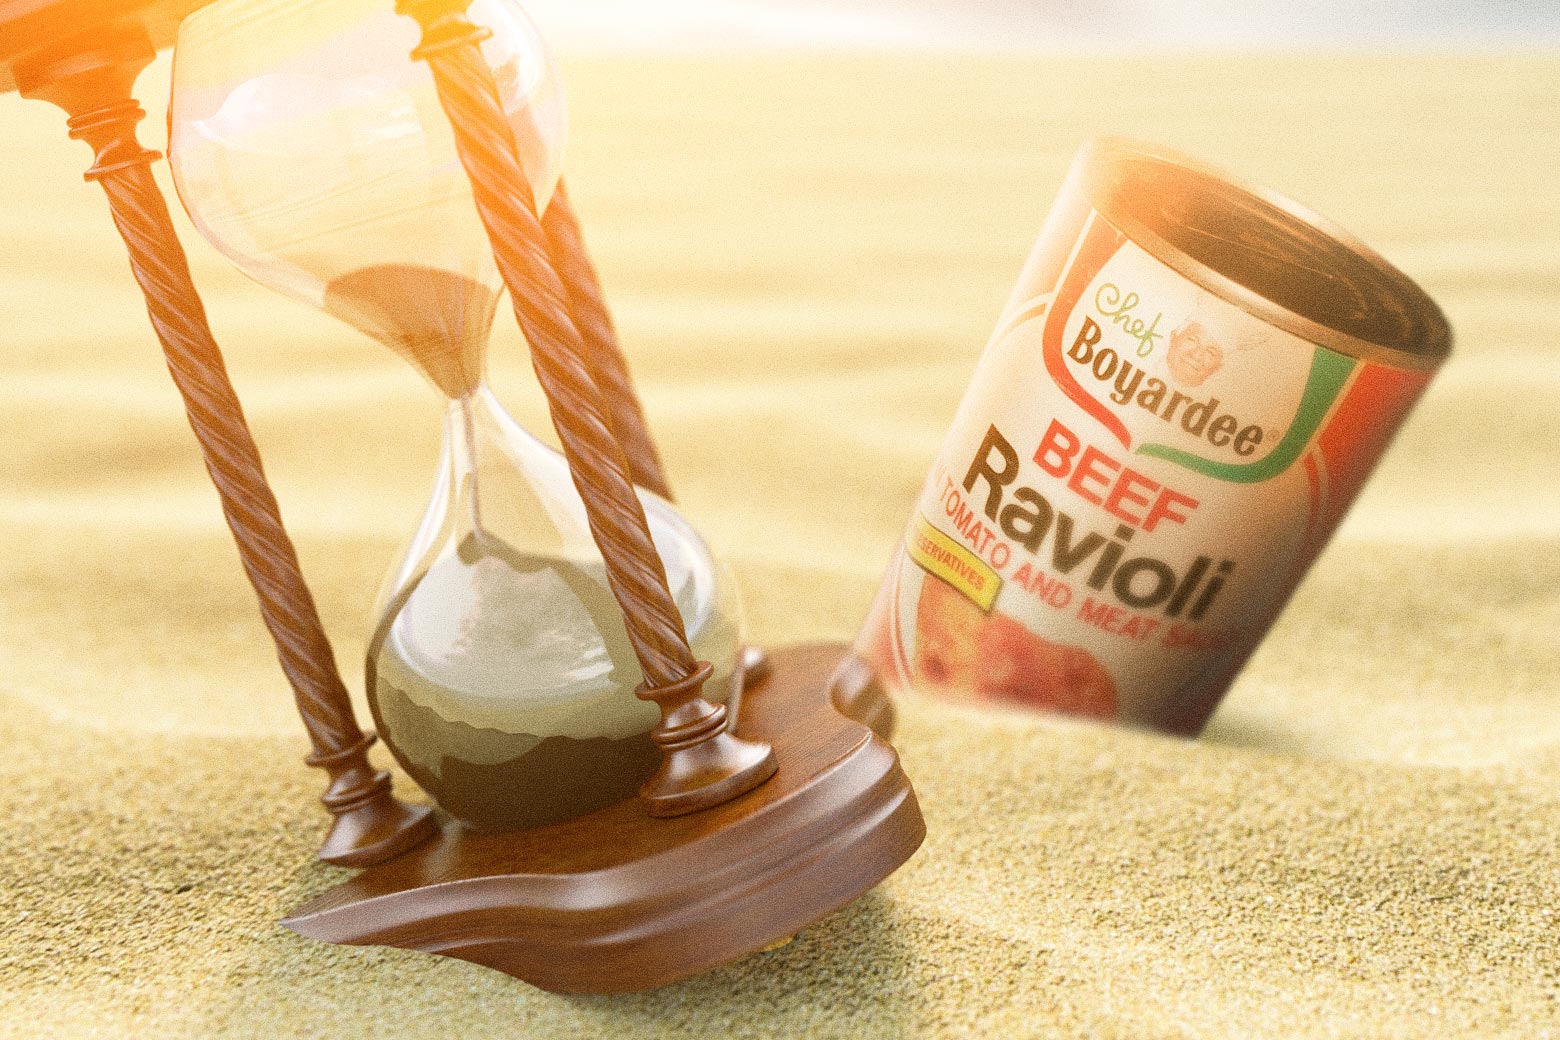 A can of Chef Boyardee ravioli languishes in the sands of time with an hourglass. 